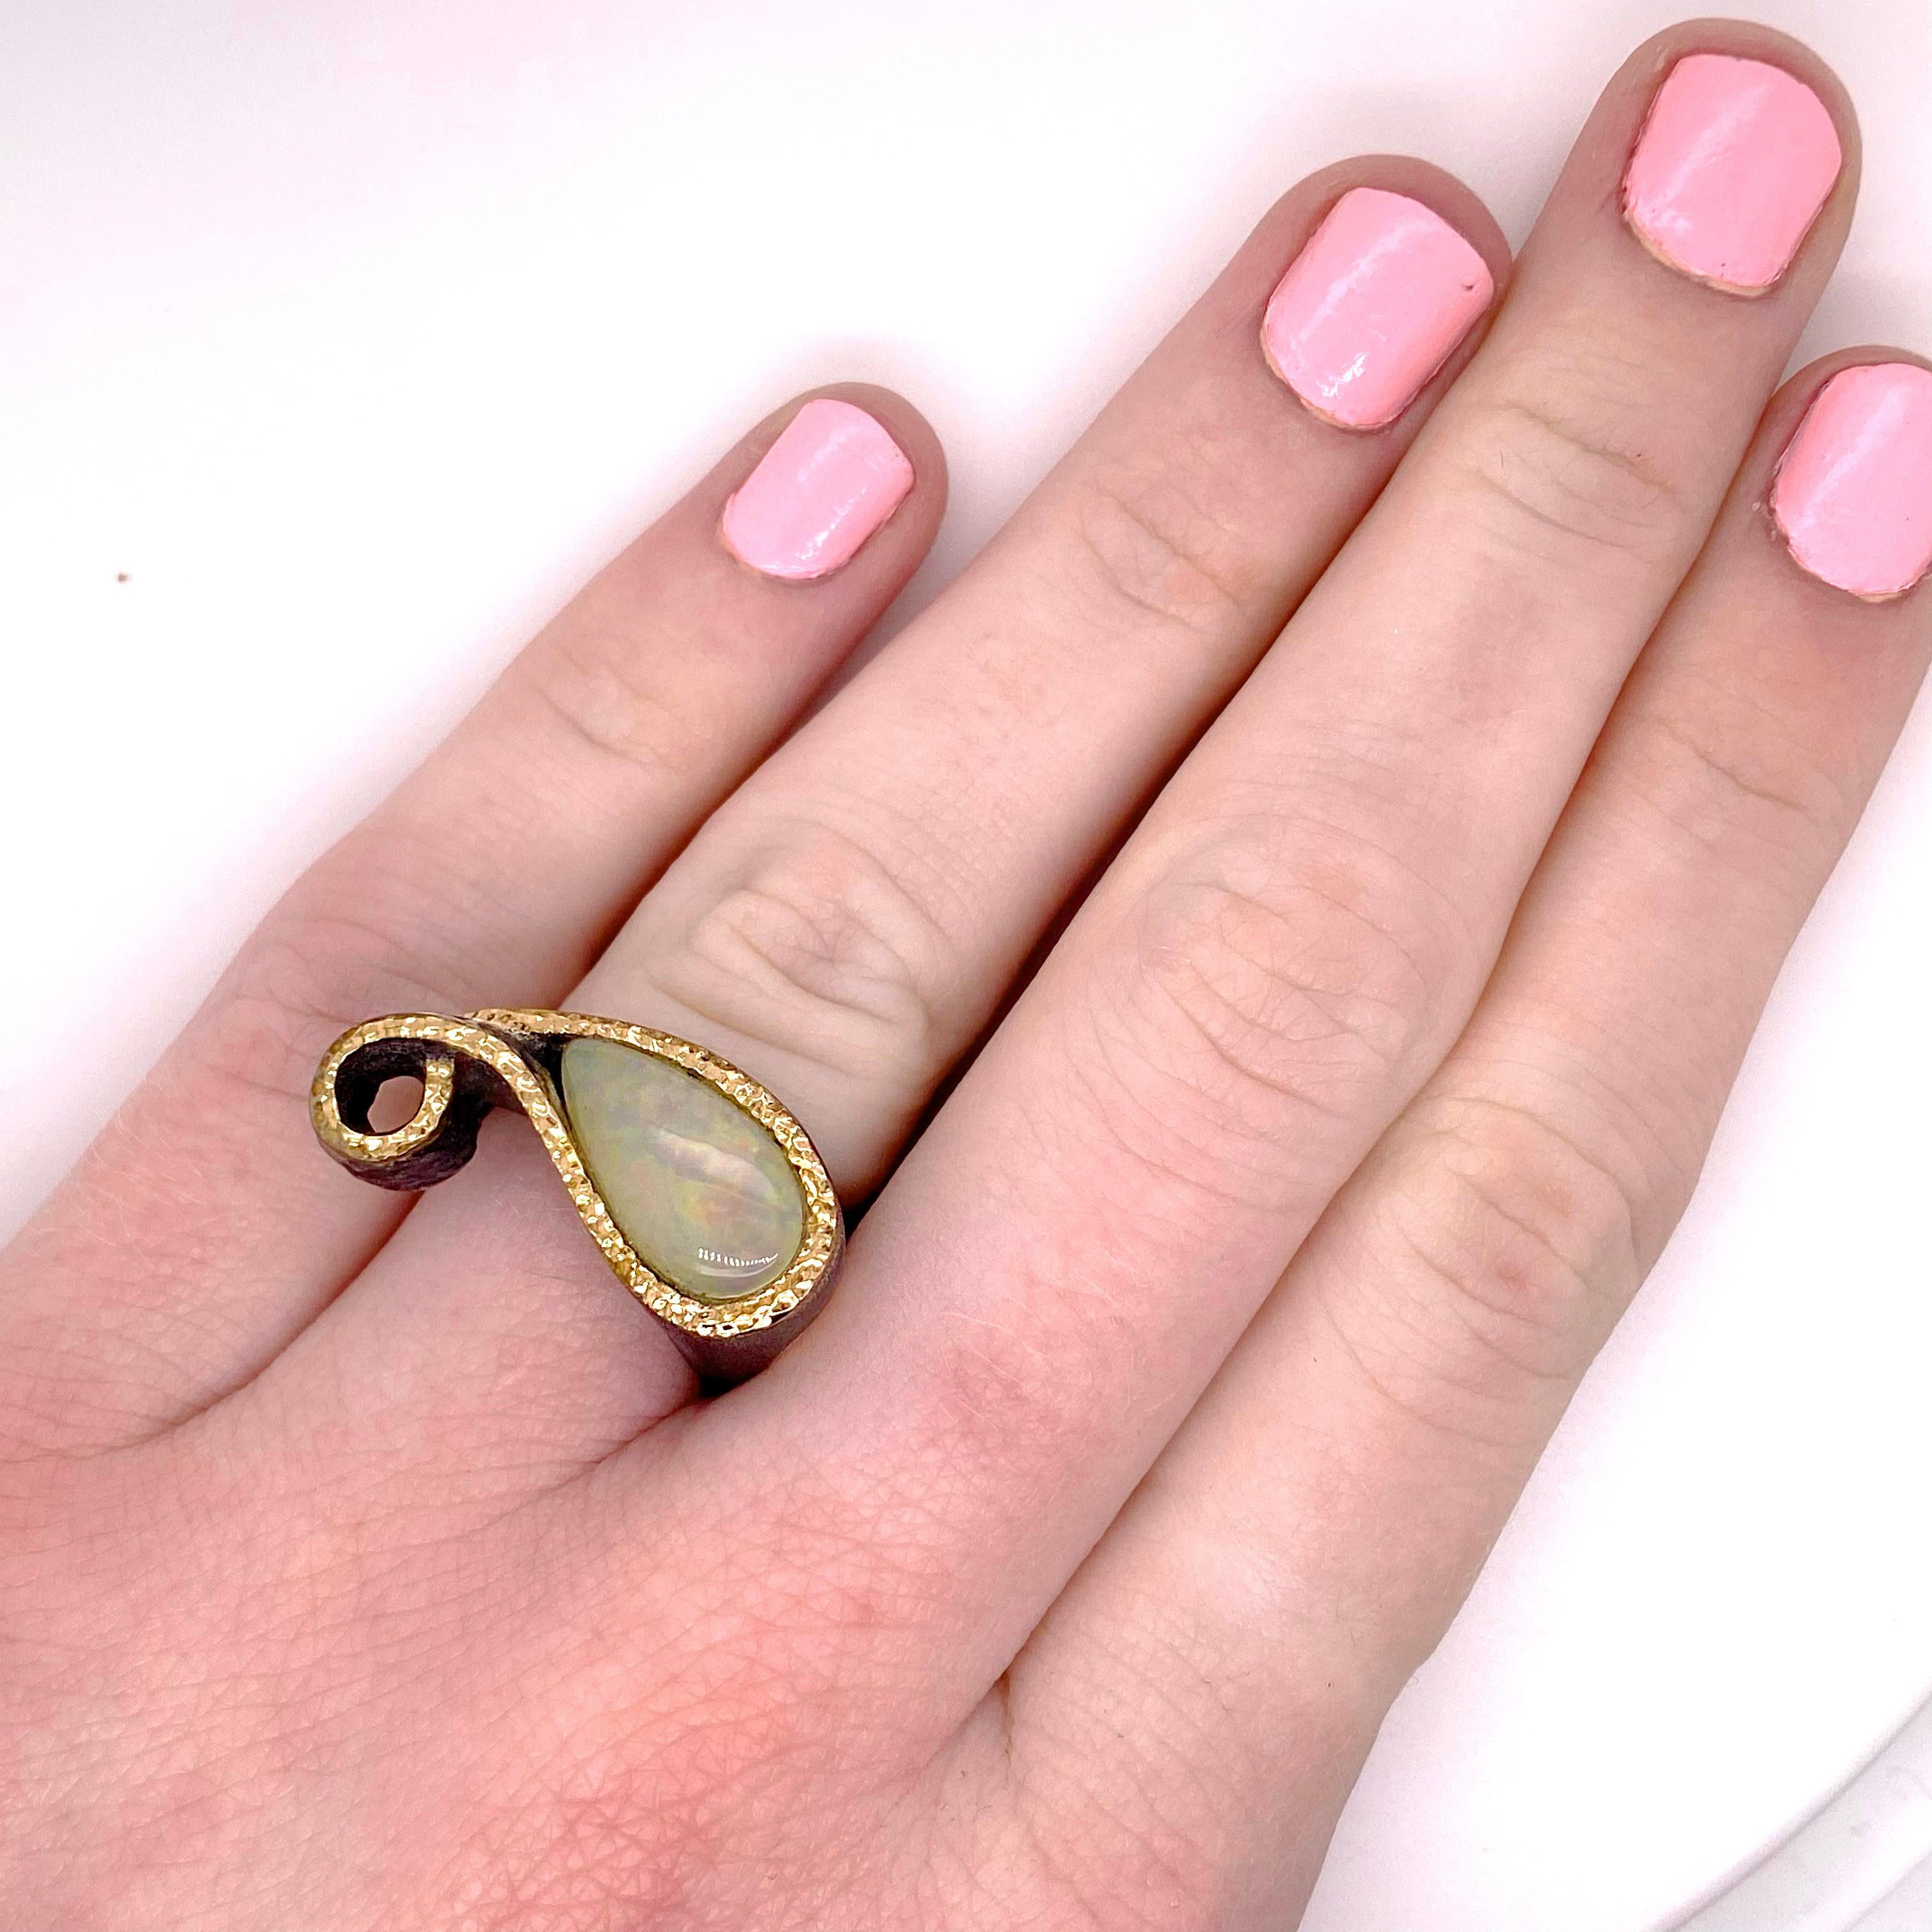 The Australian opal ring was handmade with the pear shaped opal with a gold rim around it. The ring is shaped to fit with your fingers perfectly! The design has two curly q’s that make an adorable design and will look cute on any hand or finger.